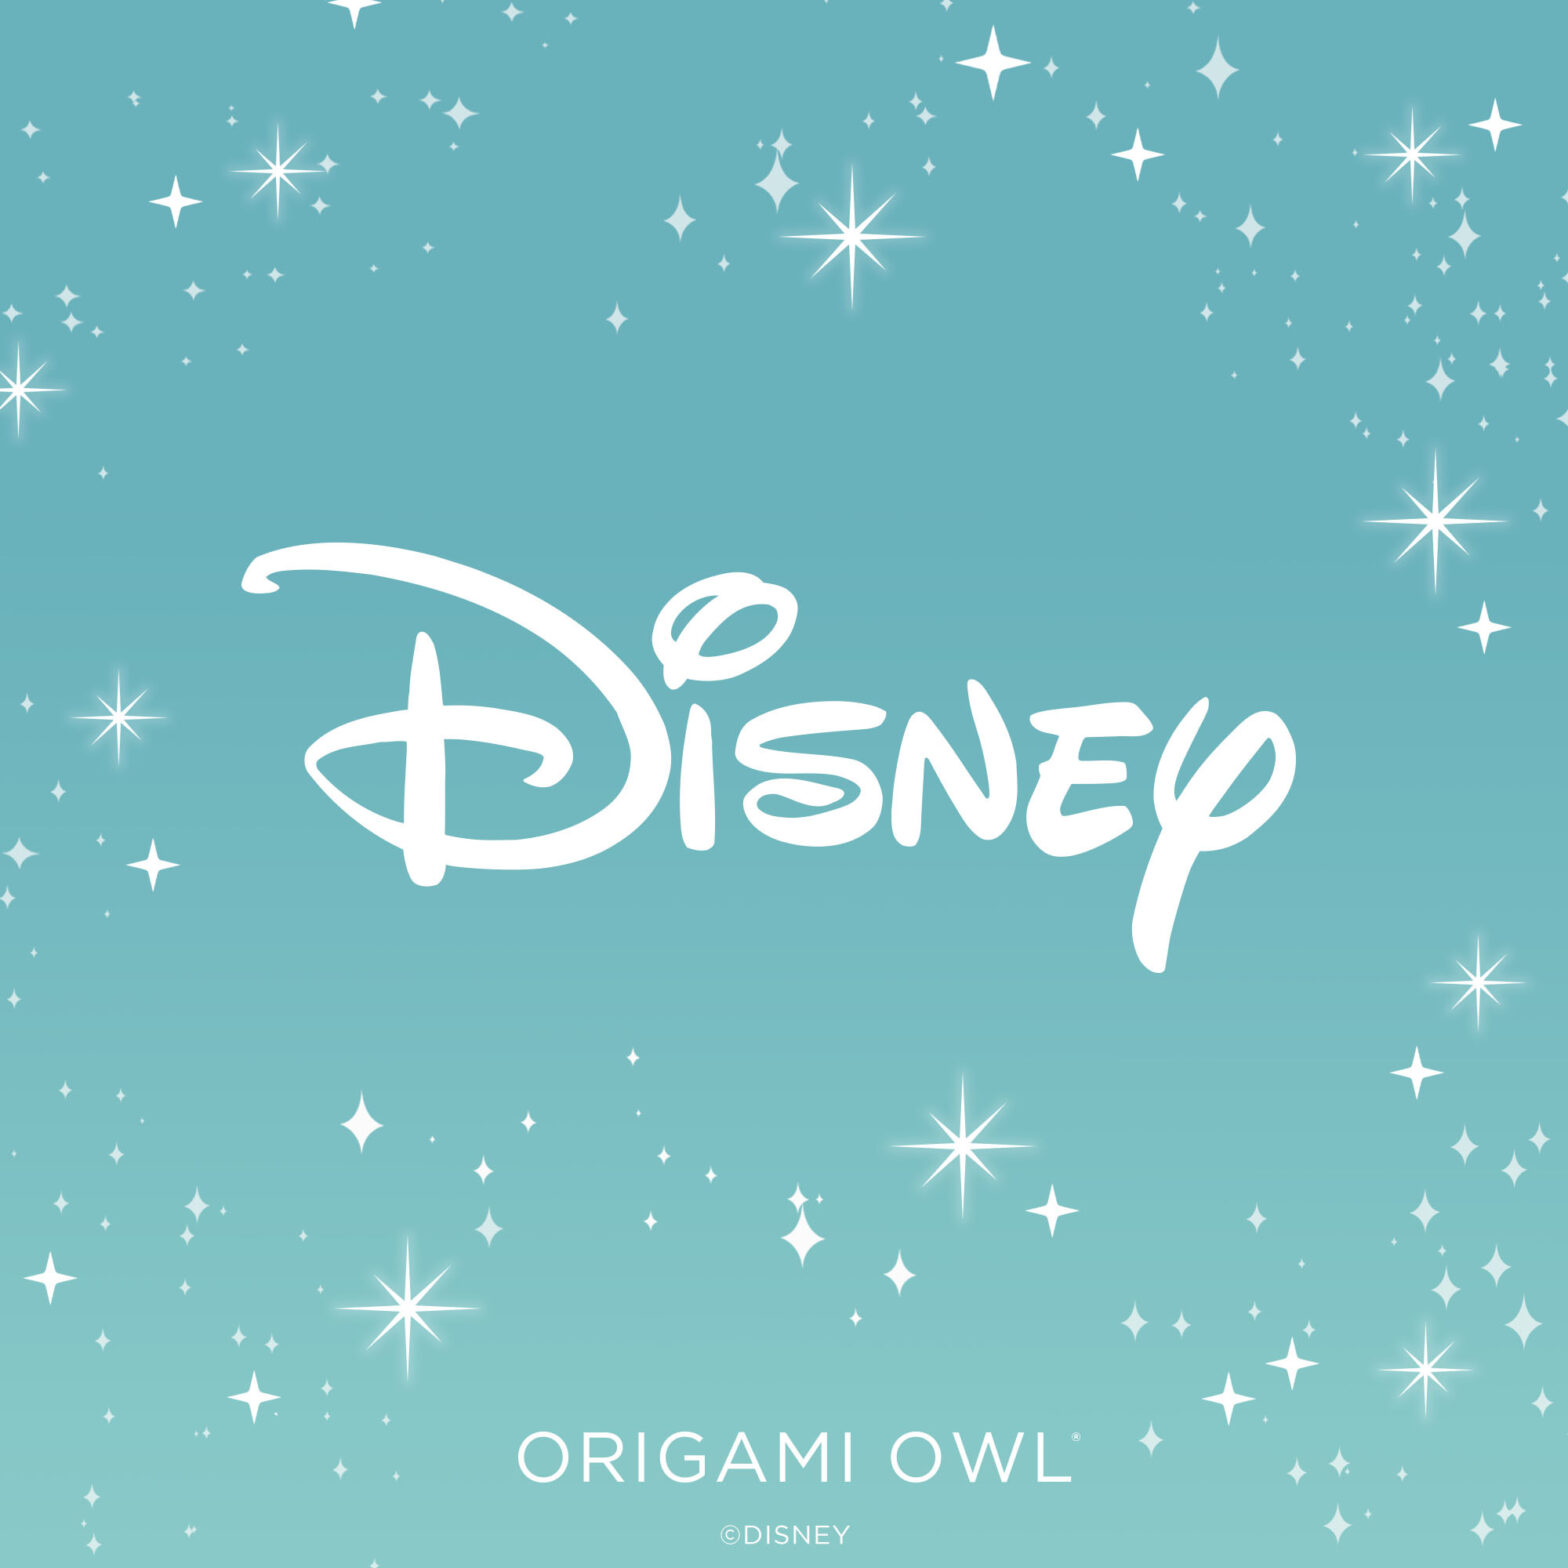 An aqua image with stars and words Disney in center and origami owl at bottom